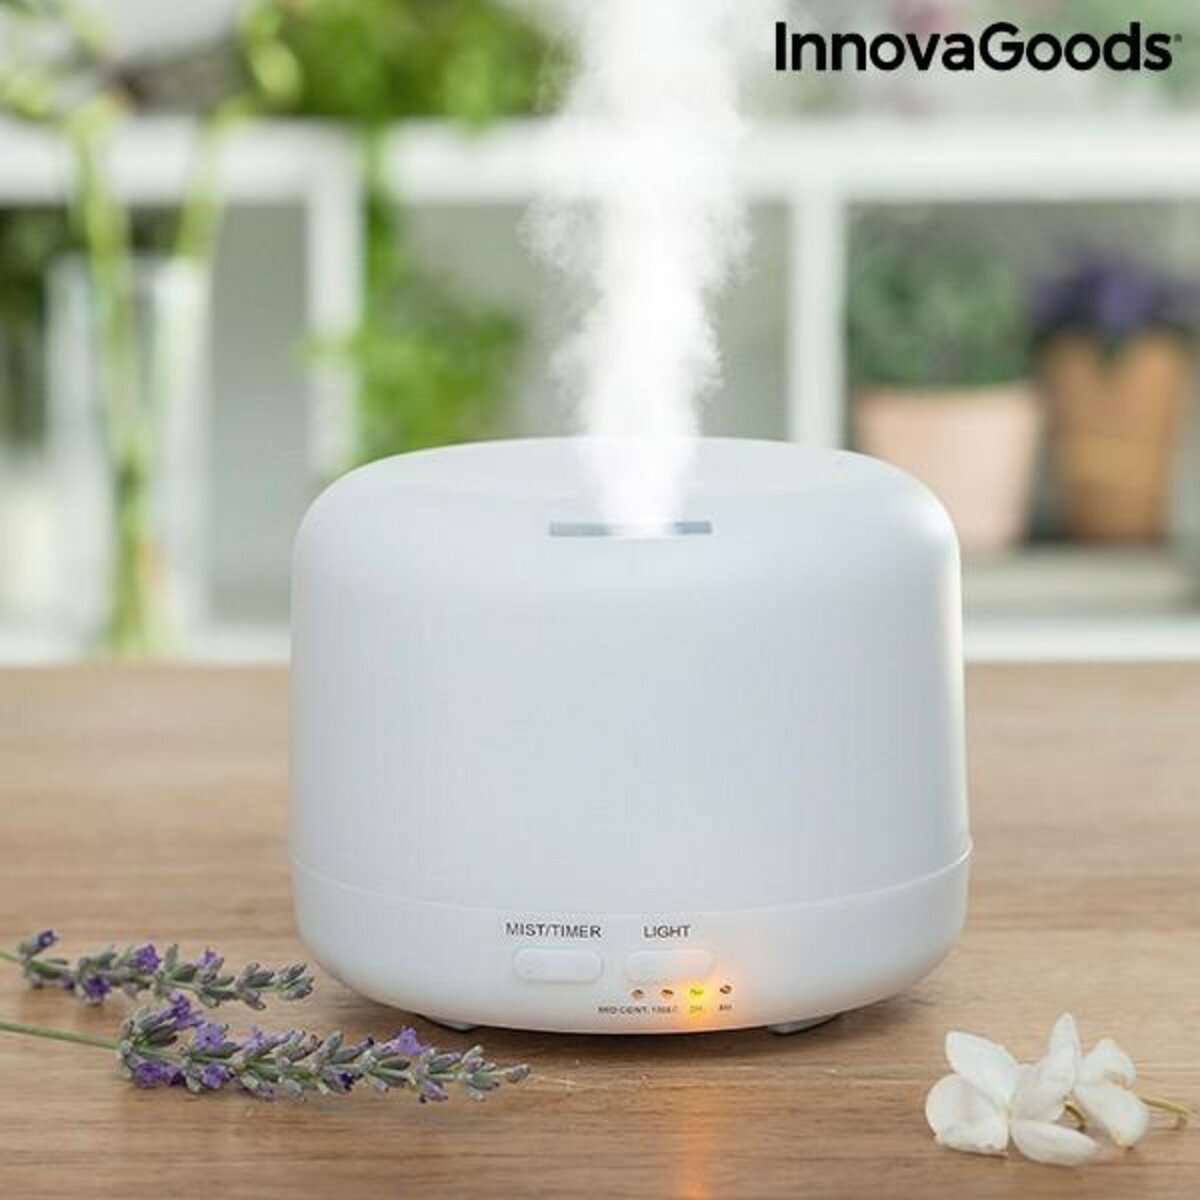 Innovagoods - Chargeur Sans Fil avec Support- Or…